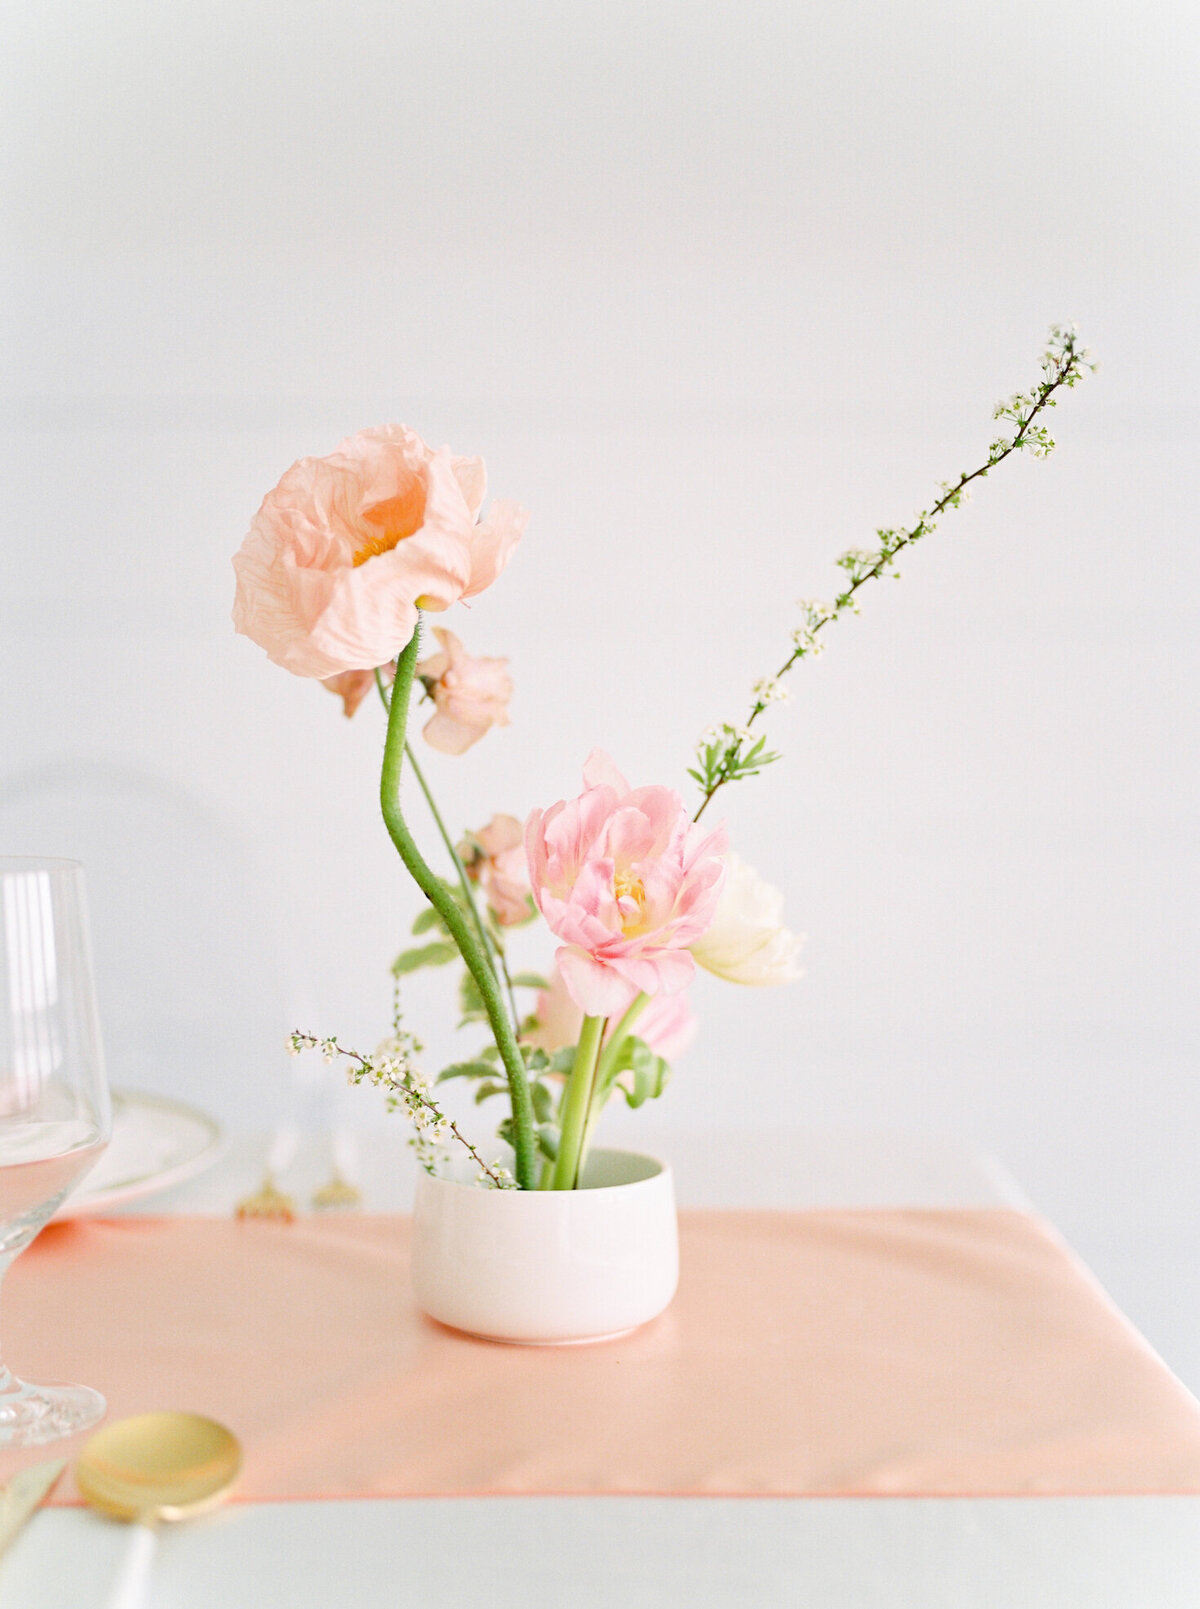 floral-and-field-design-bespoke-wedding-floral-styling-calgary-alberta-peach-kiss-editorial-tablescape-46